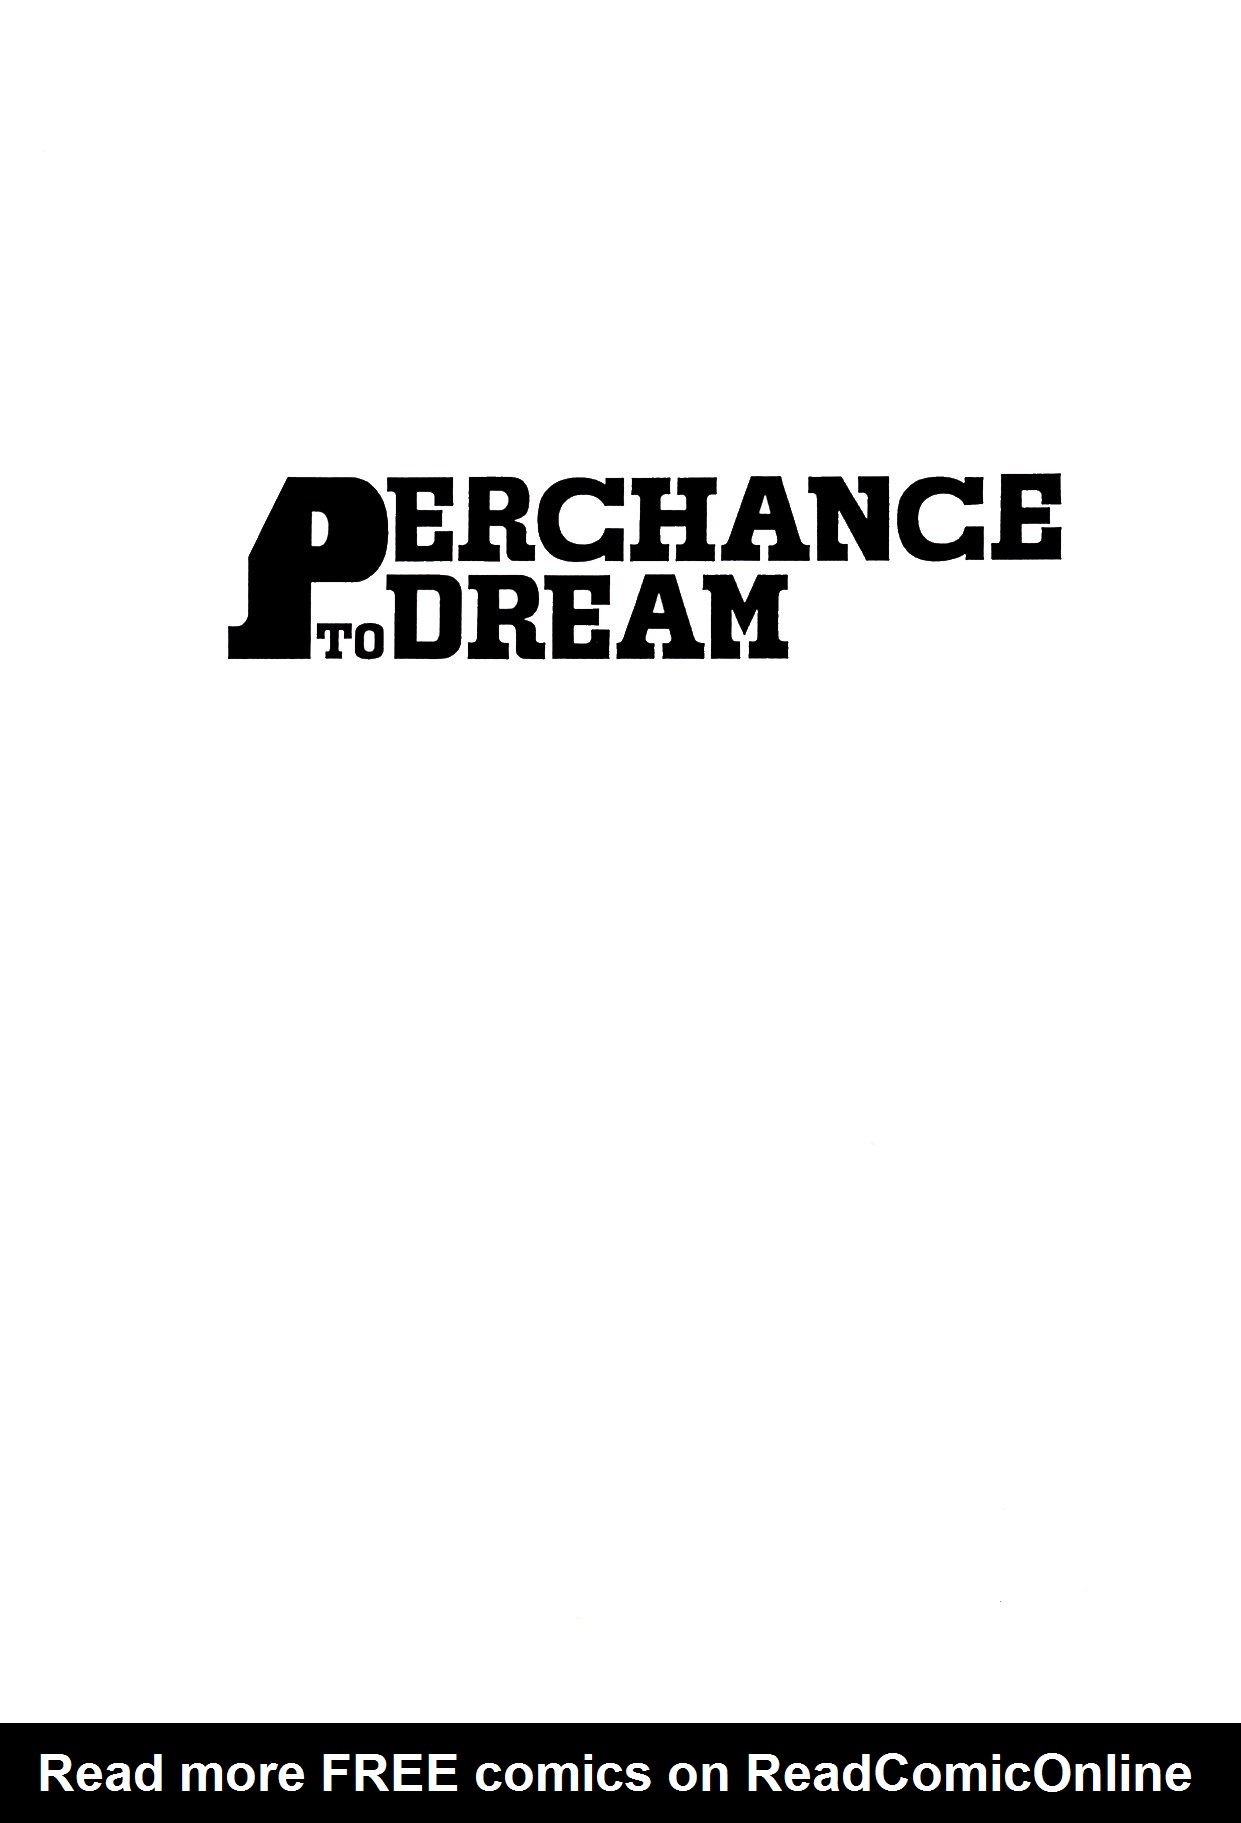 Read online Perchance to dream - The Indian adventures of Giuseppe Bergman comic -  Issue # TPB - 2